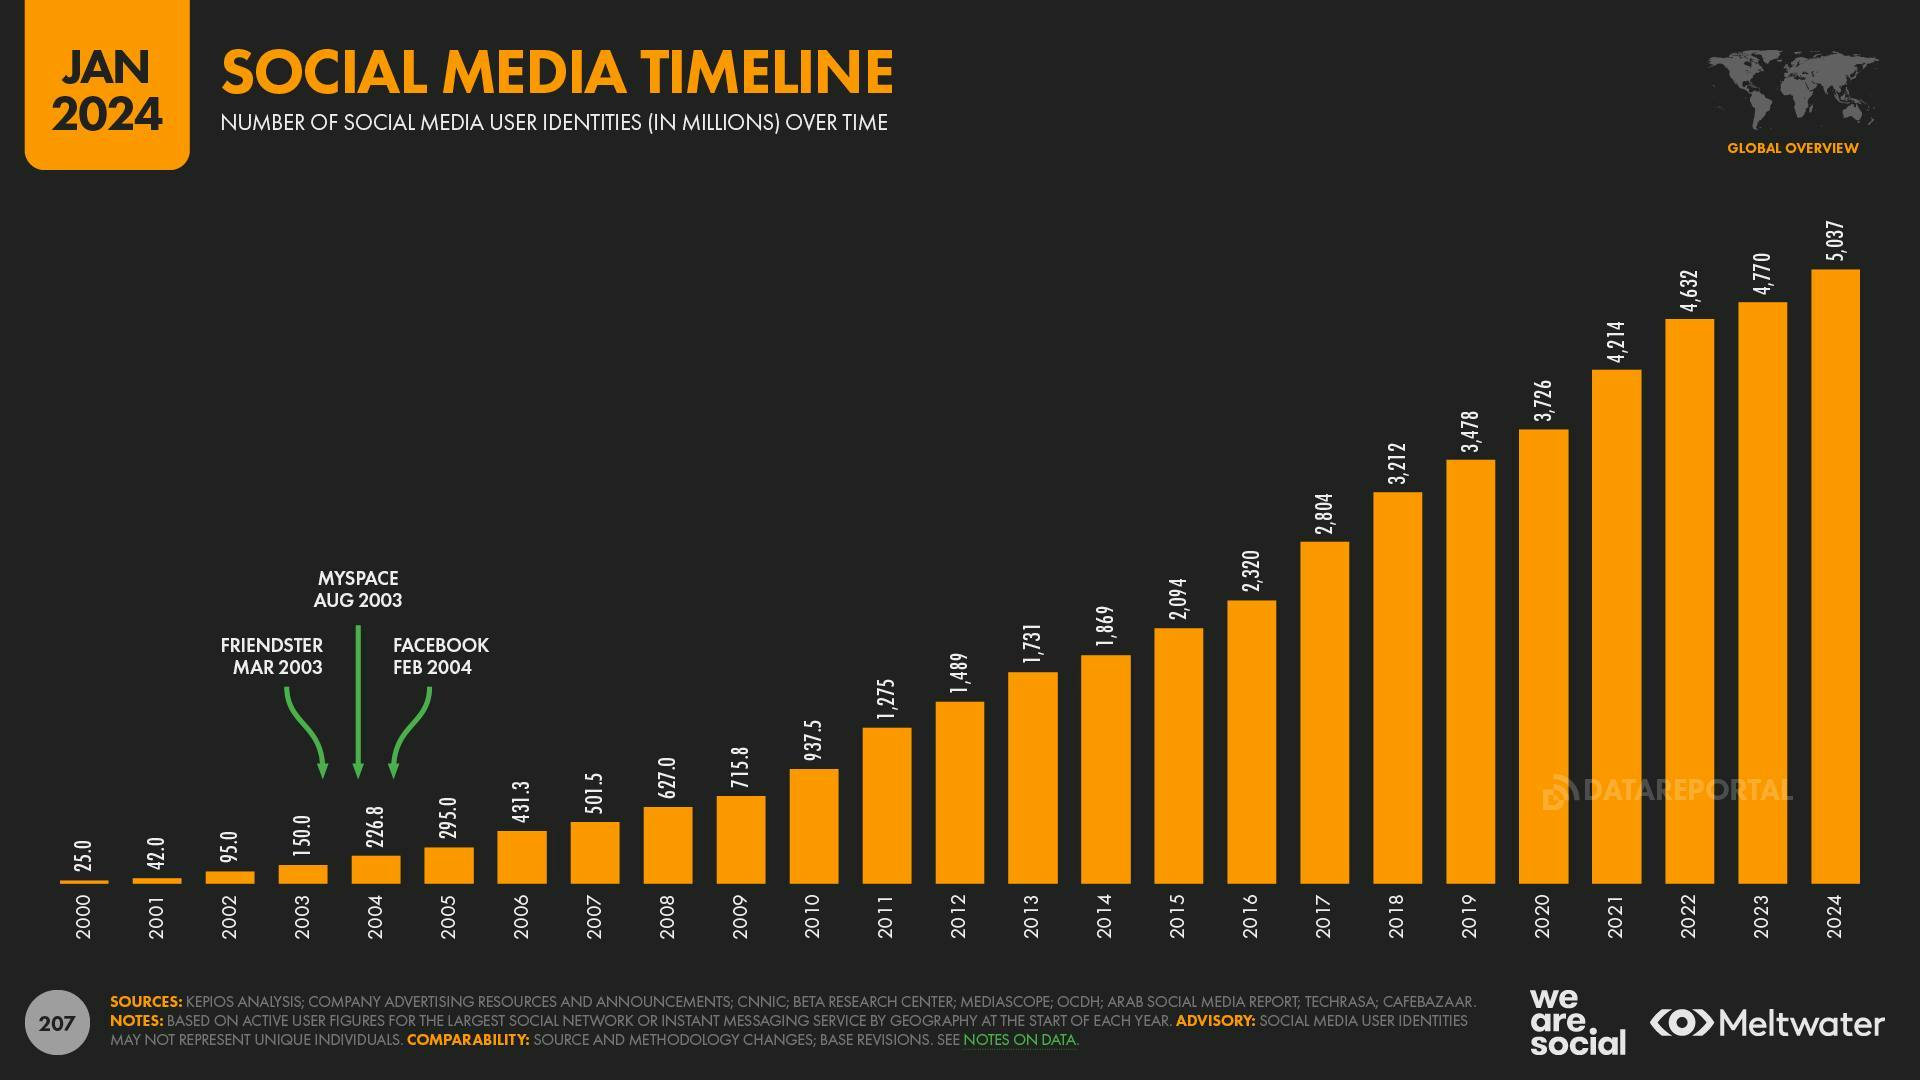 Social media timeline chart from the Digital 2024 Global Overview Report